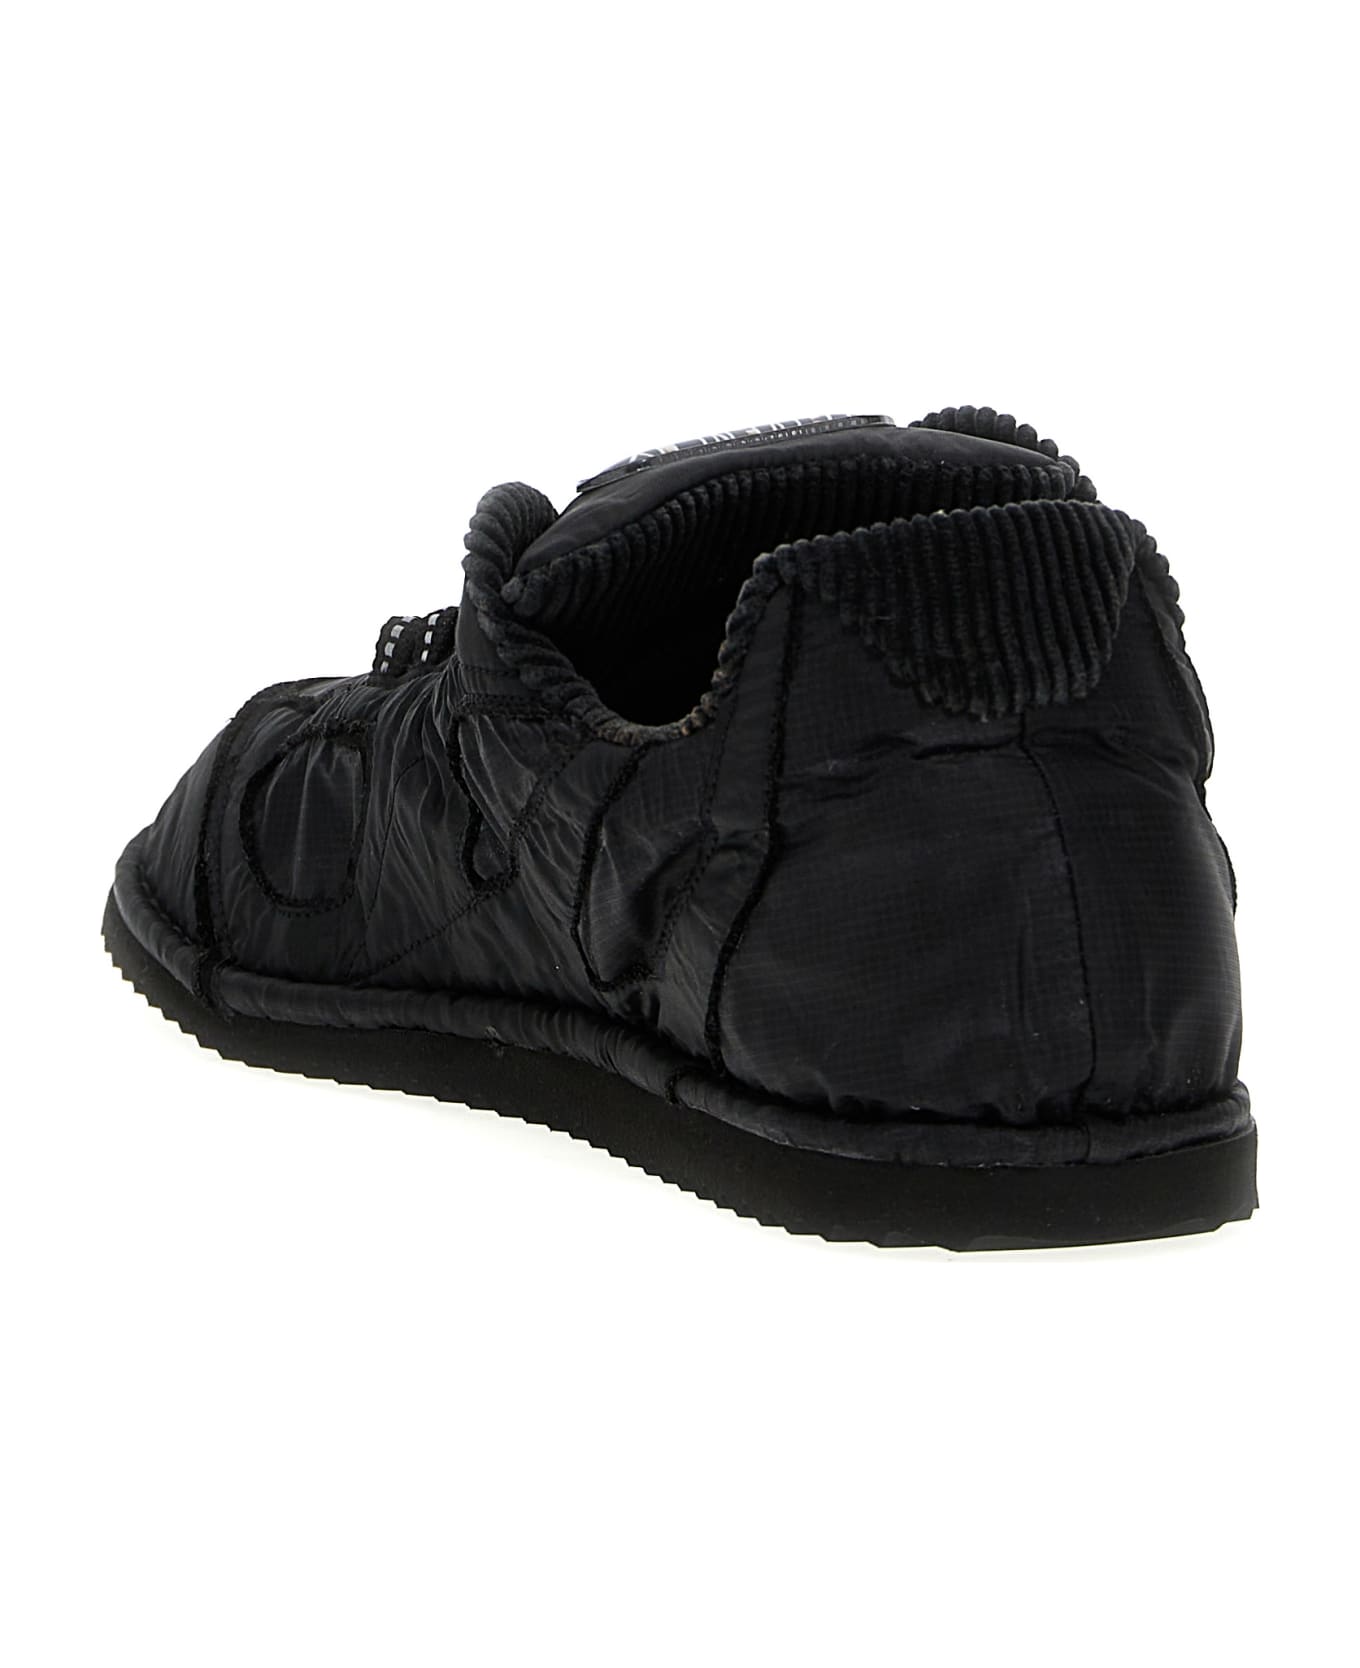 Givenchy Sneakers - Black スニーカー